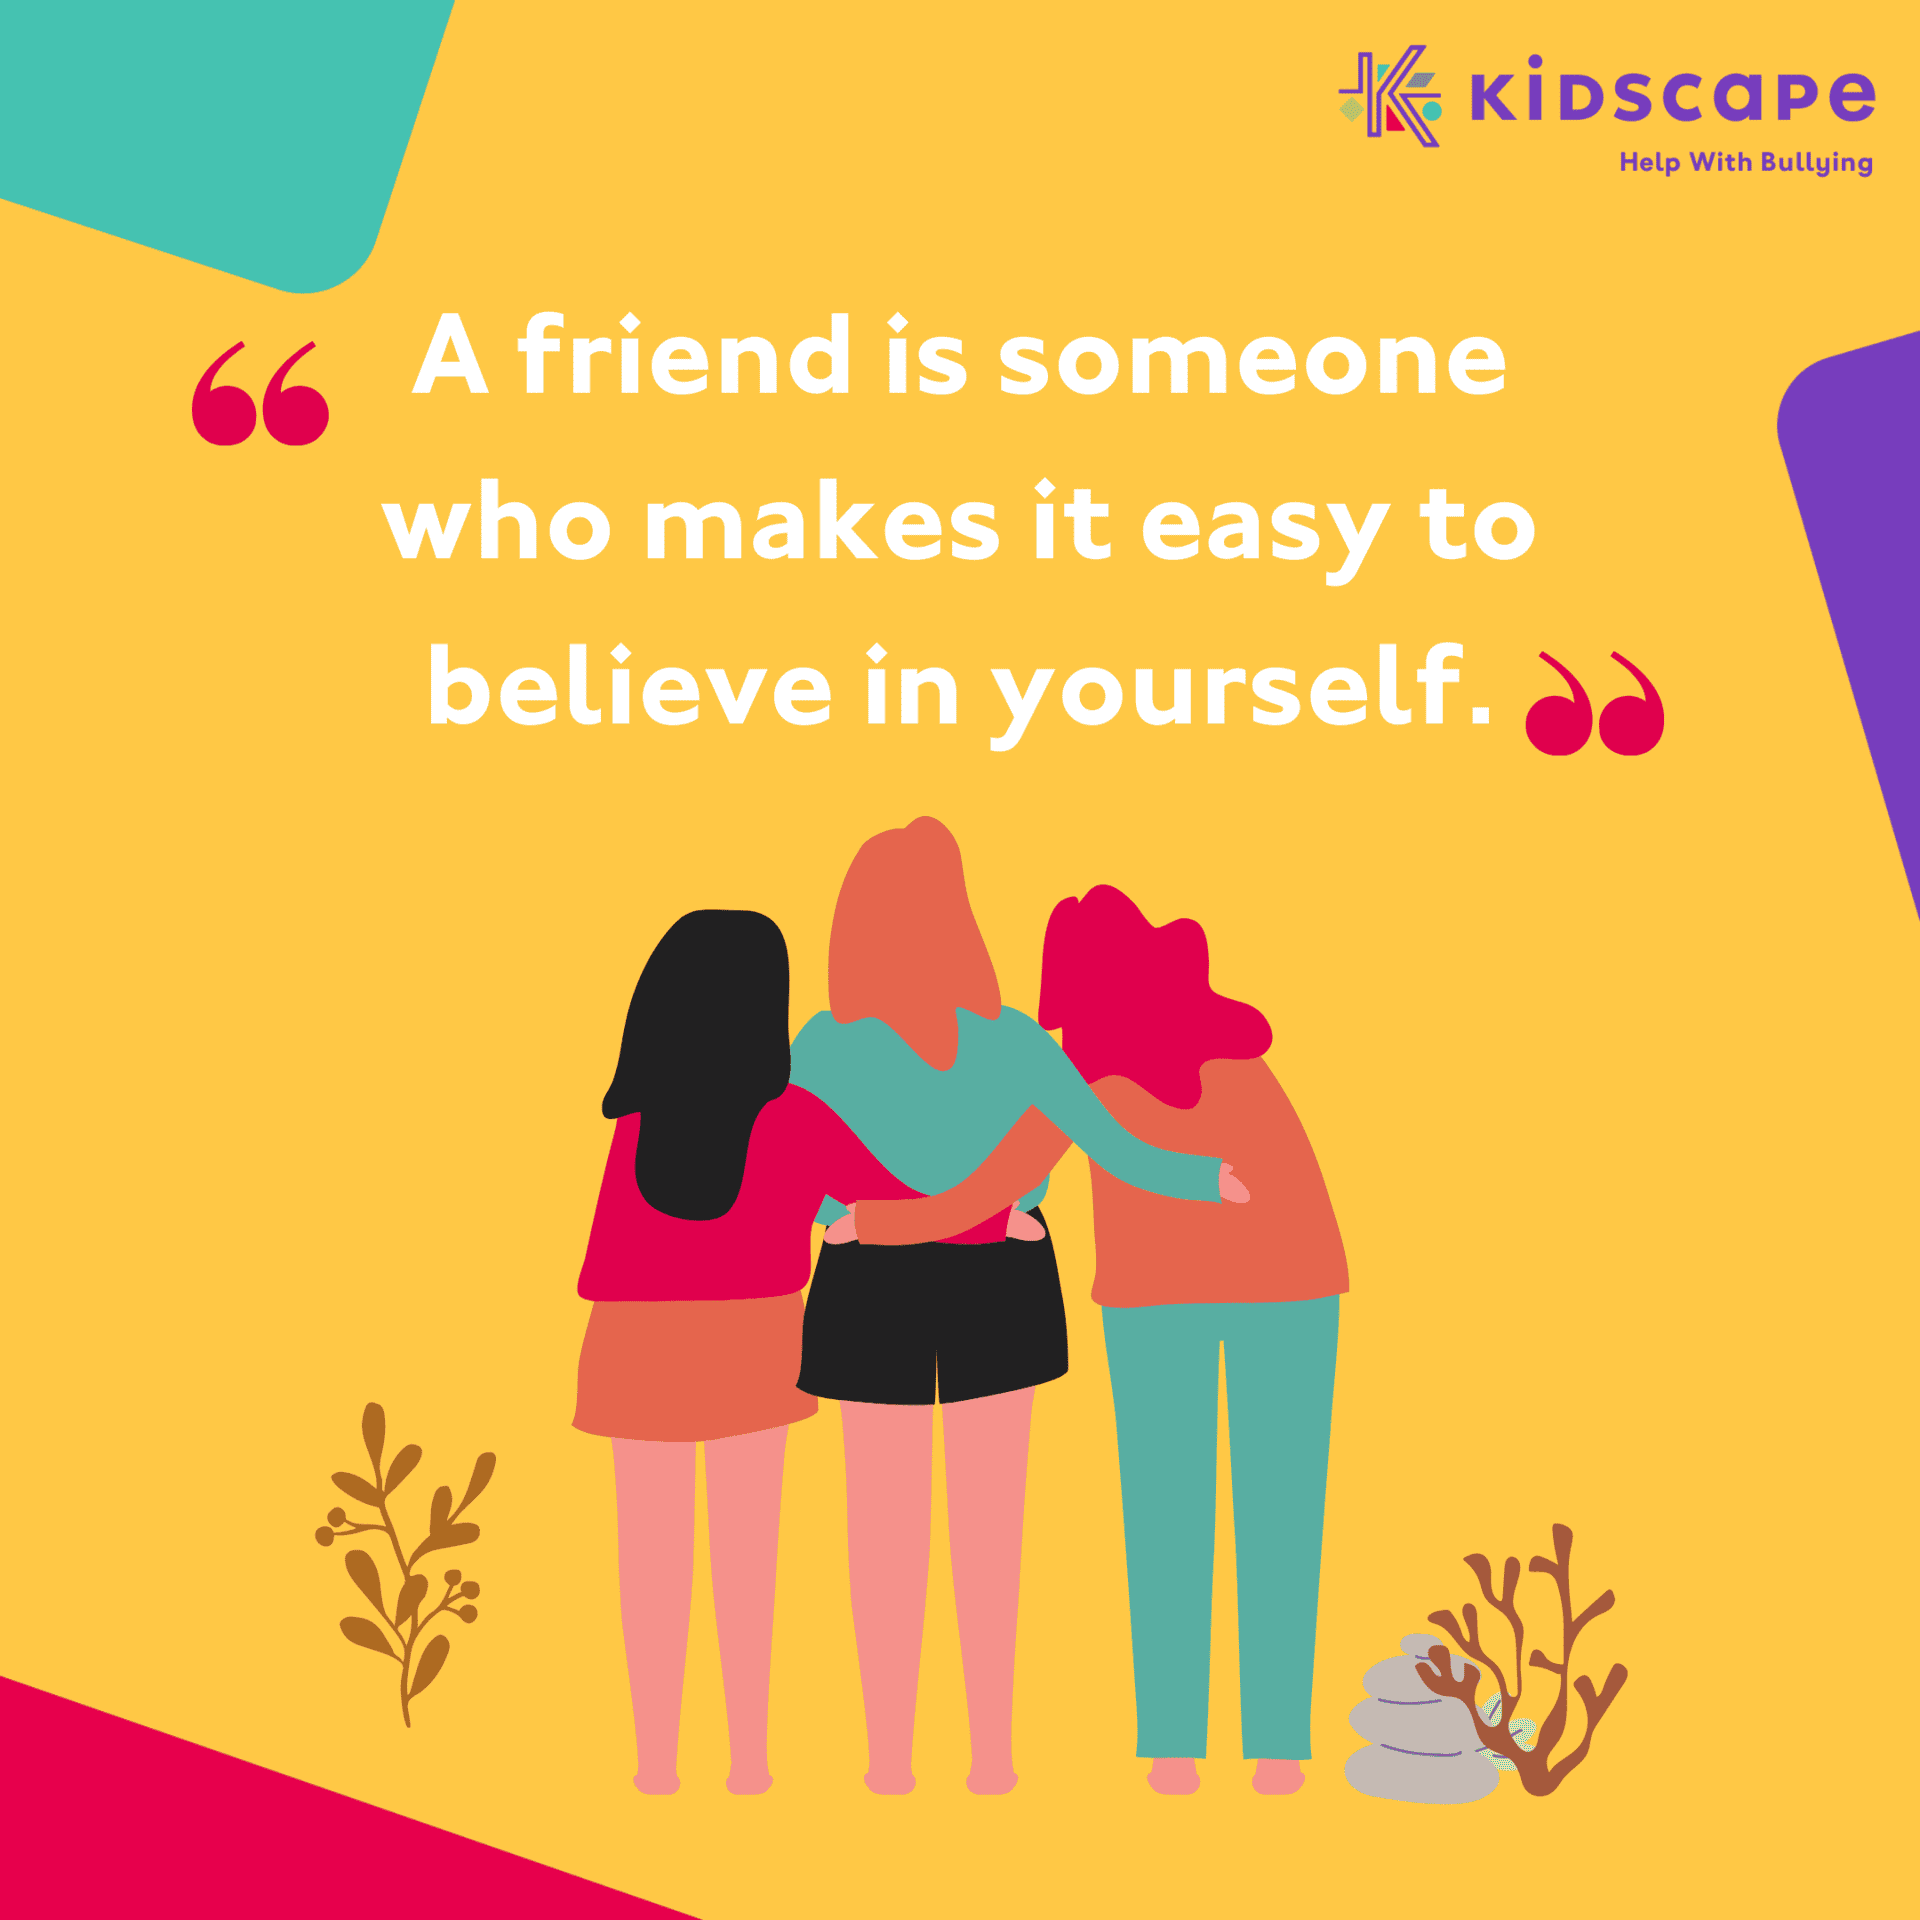 A friend is someone who makes it easy to believe in yourself